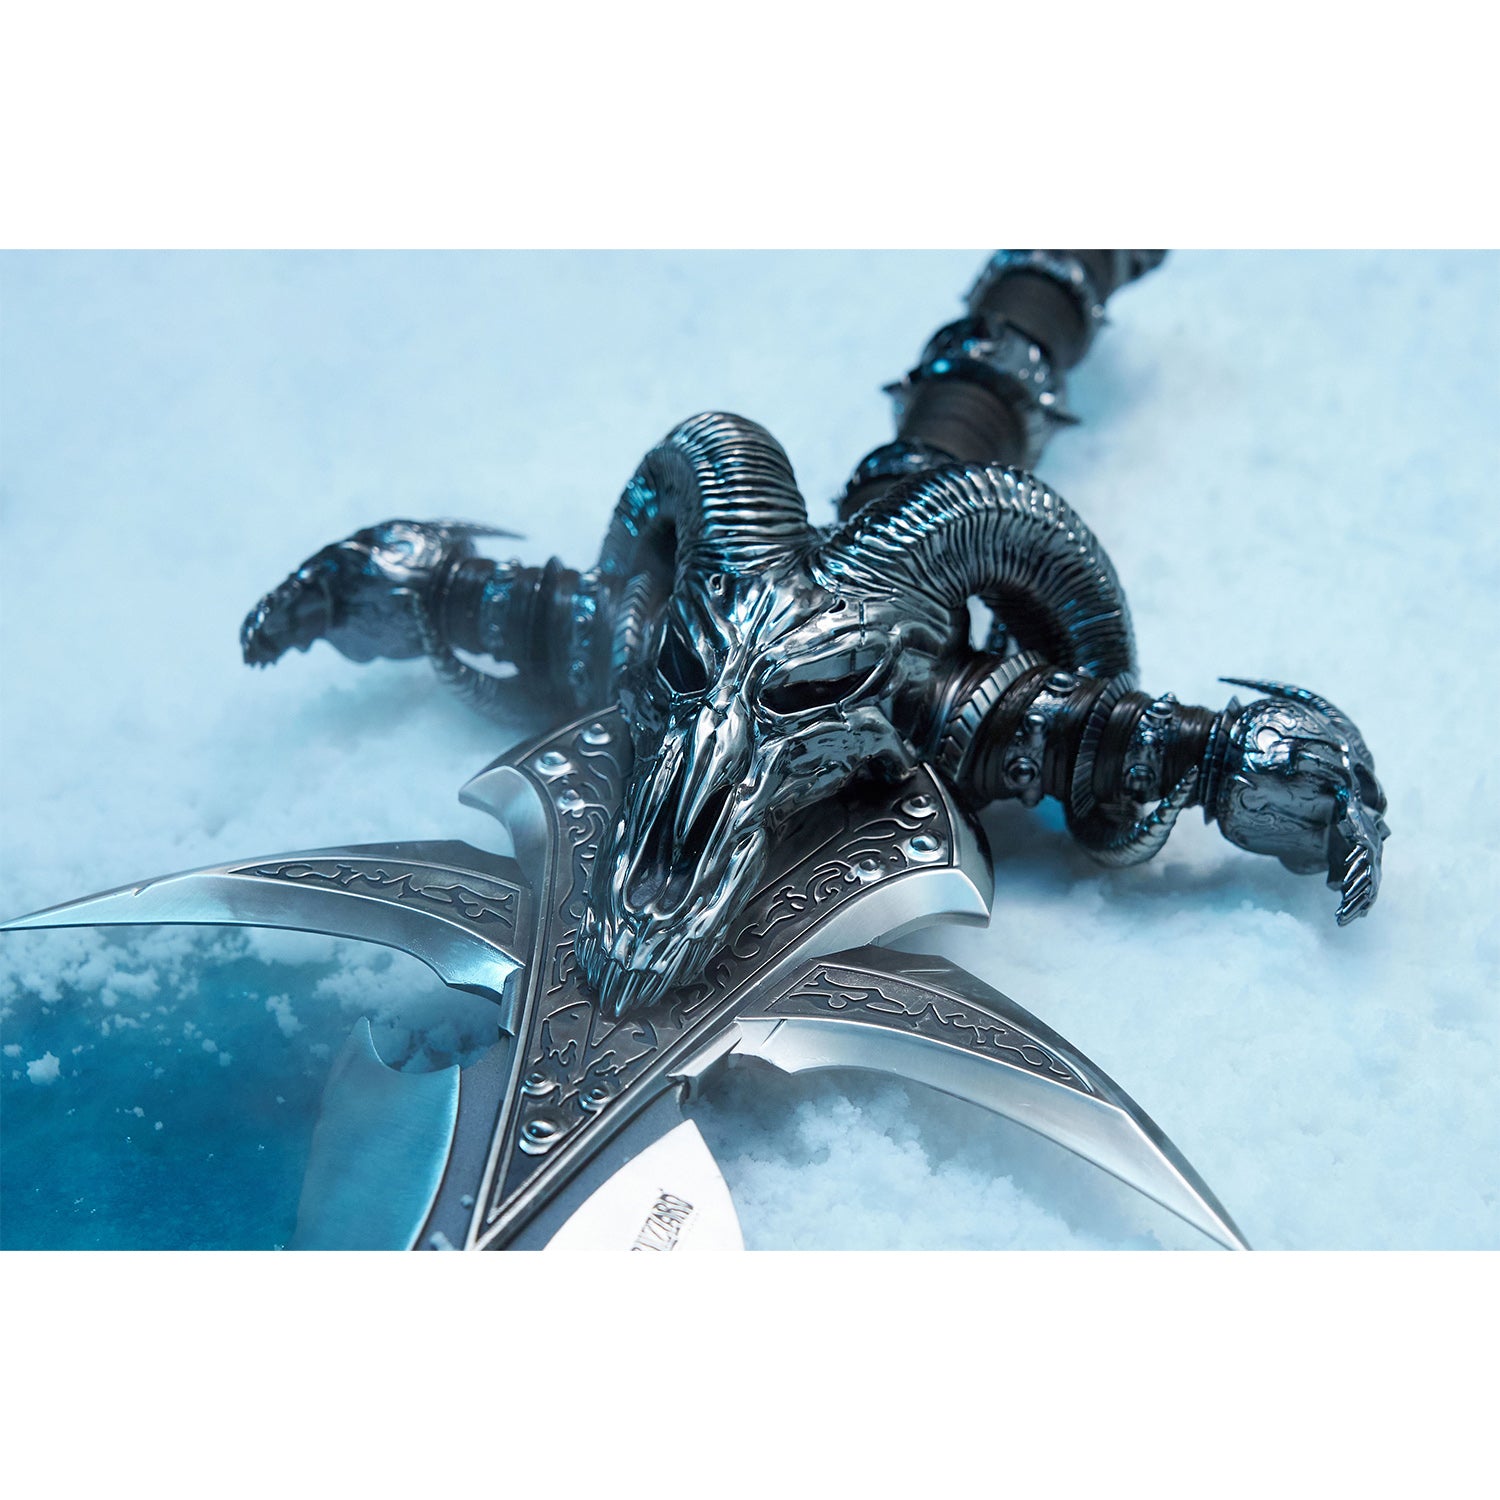 World of Warcraft Frostmourne Premium Replica - Close Up View of Sword Hilt Details